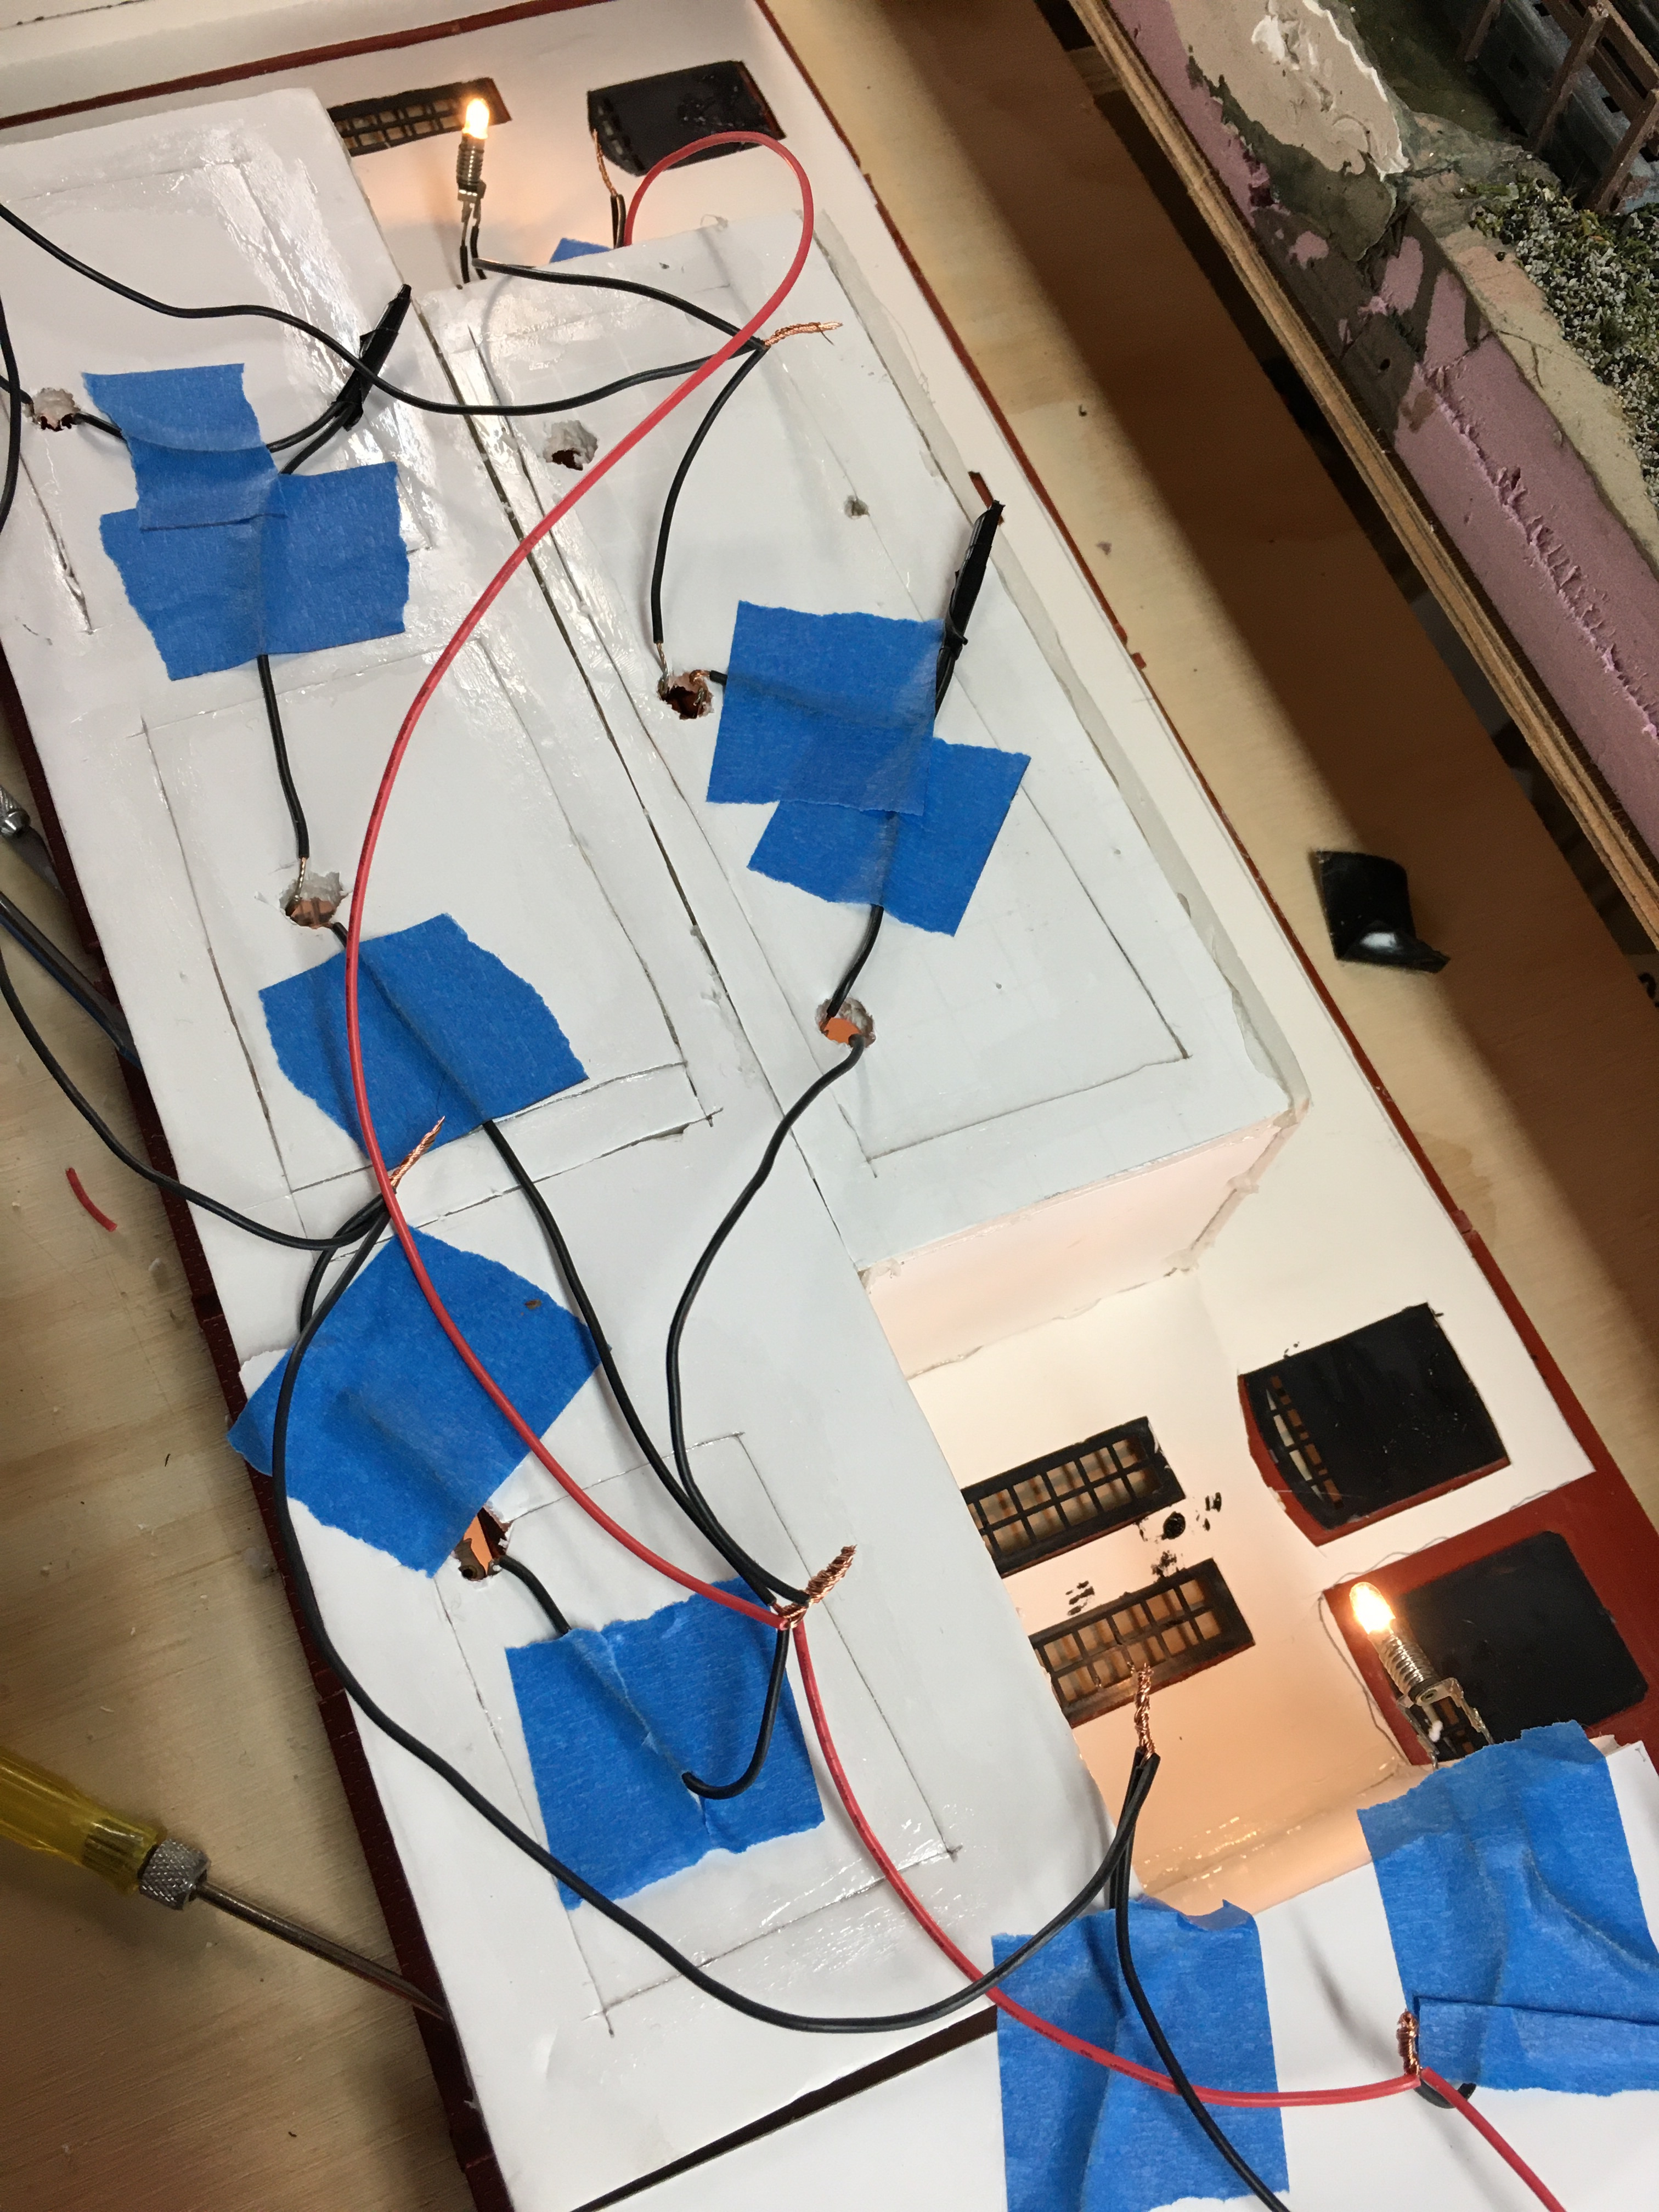 Backside view of Backdrop Factory showing wiring